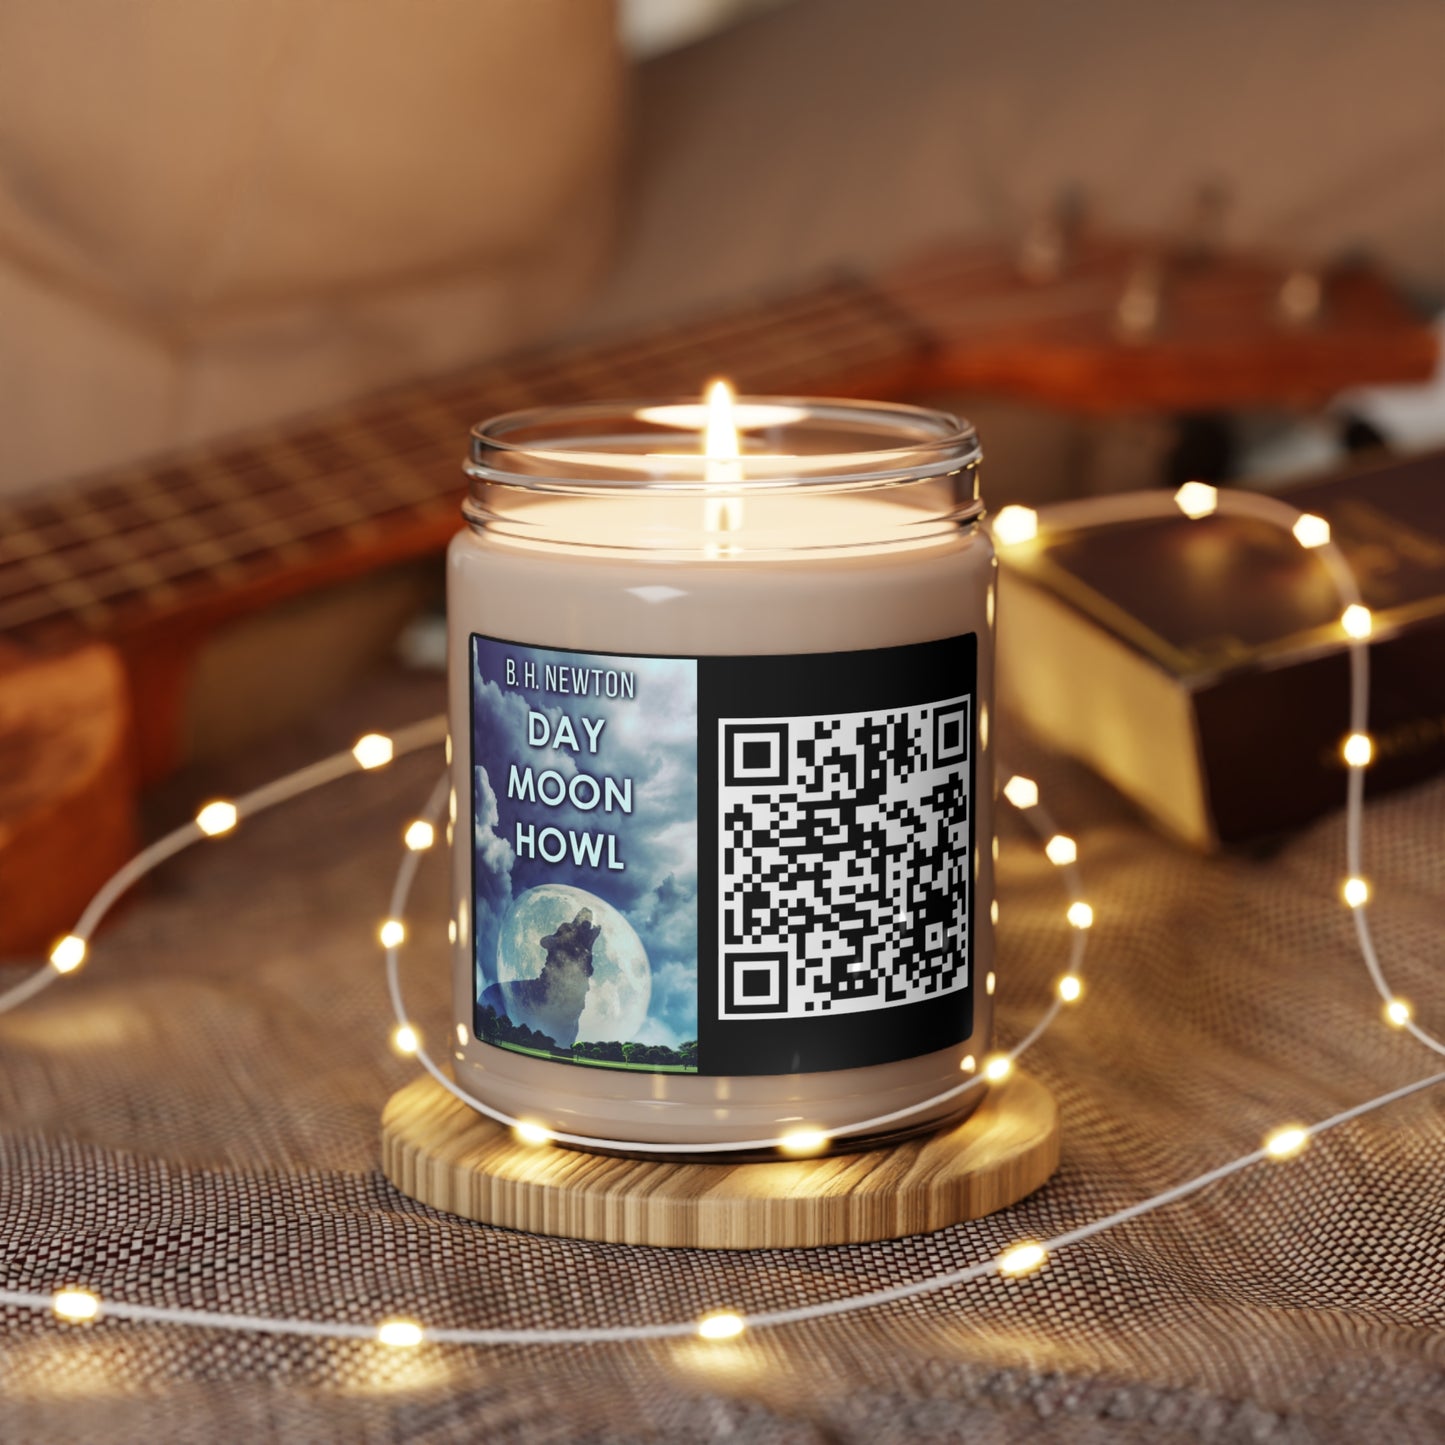 Day Moon Howl - Scented Soy Candle